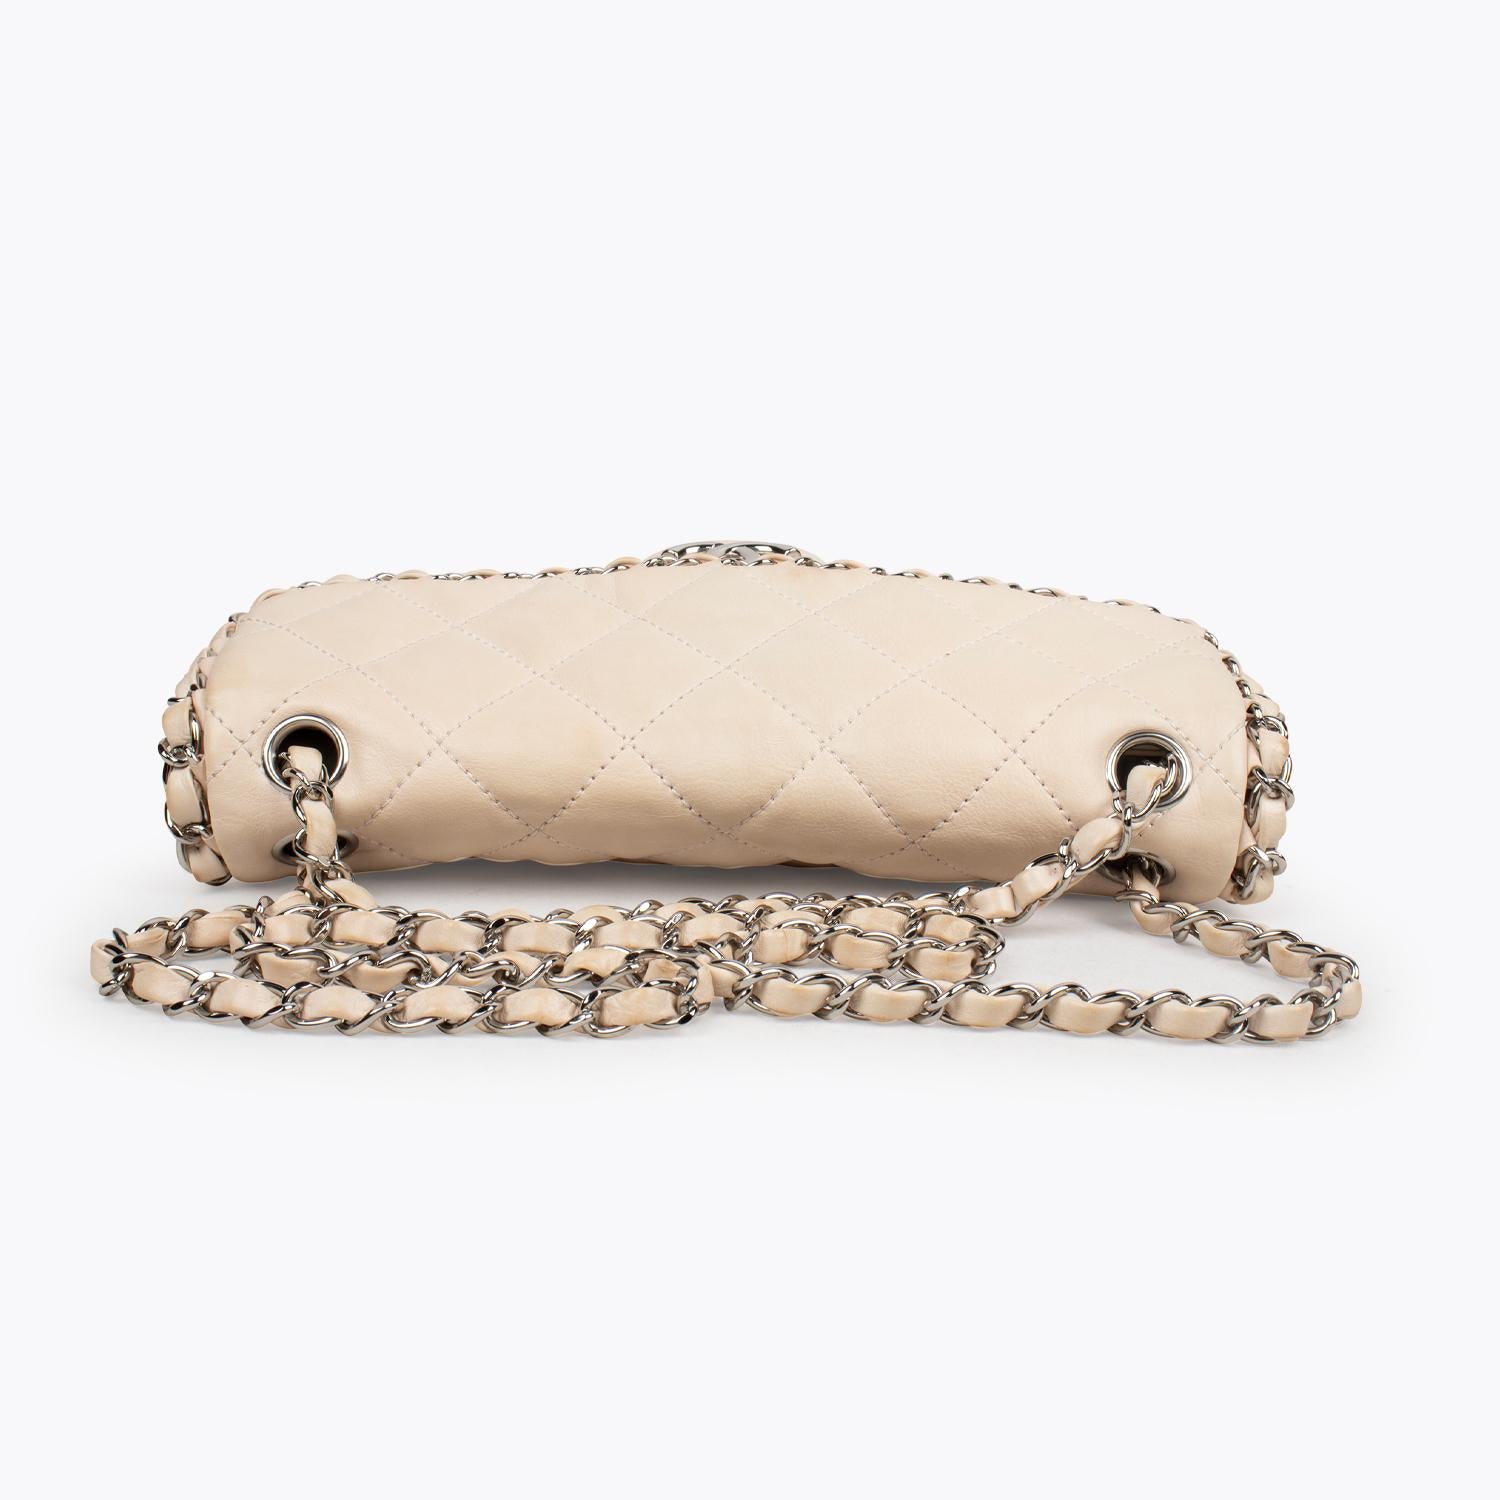 Chanel Classic Soft Single Flap Bag In Good Condition For Sale In Sundbyberg, SE